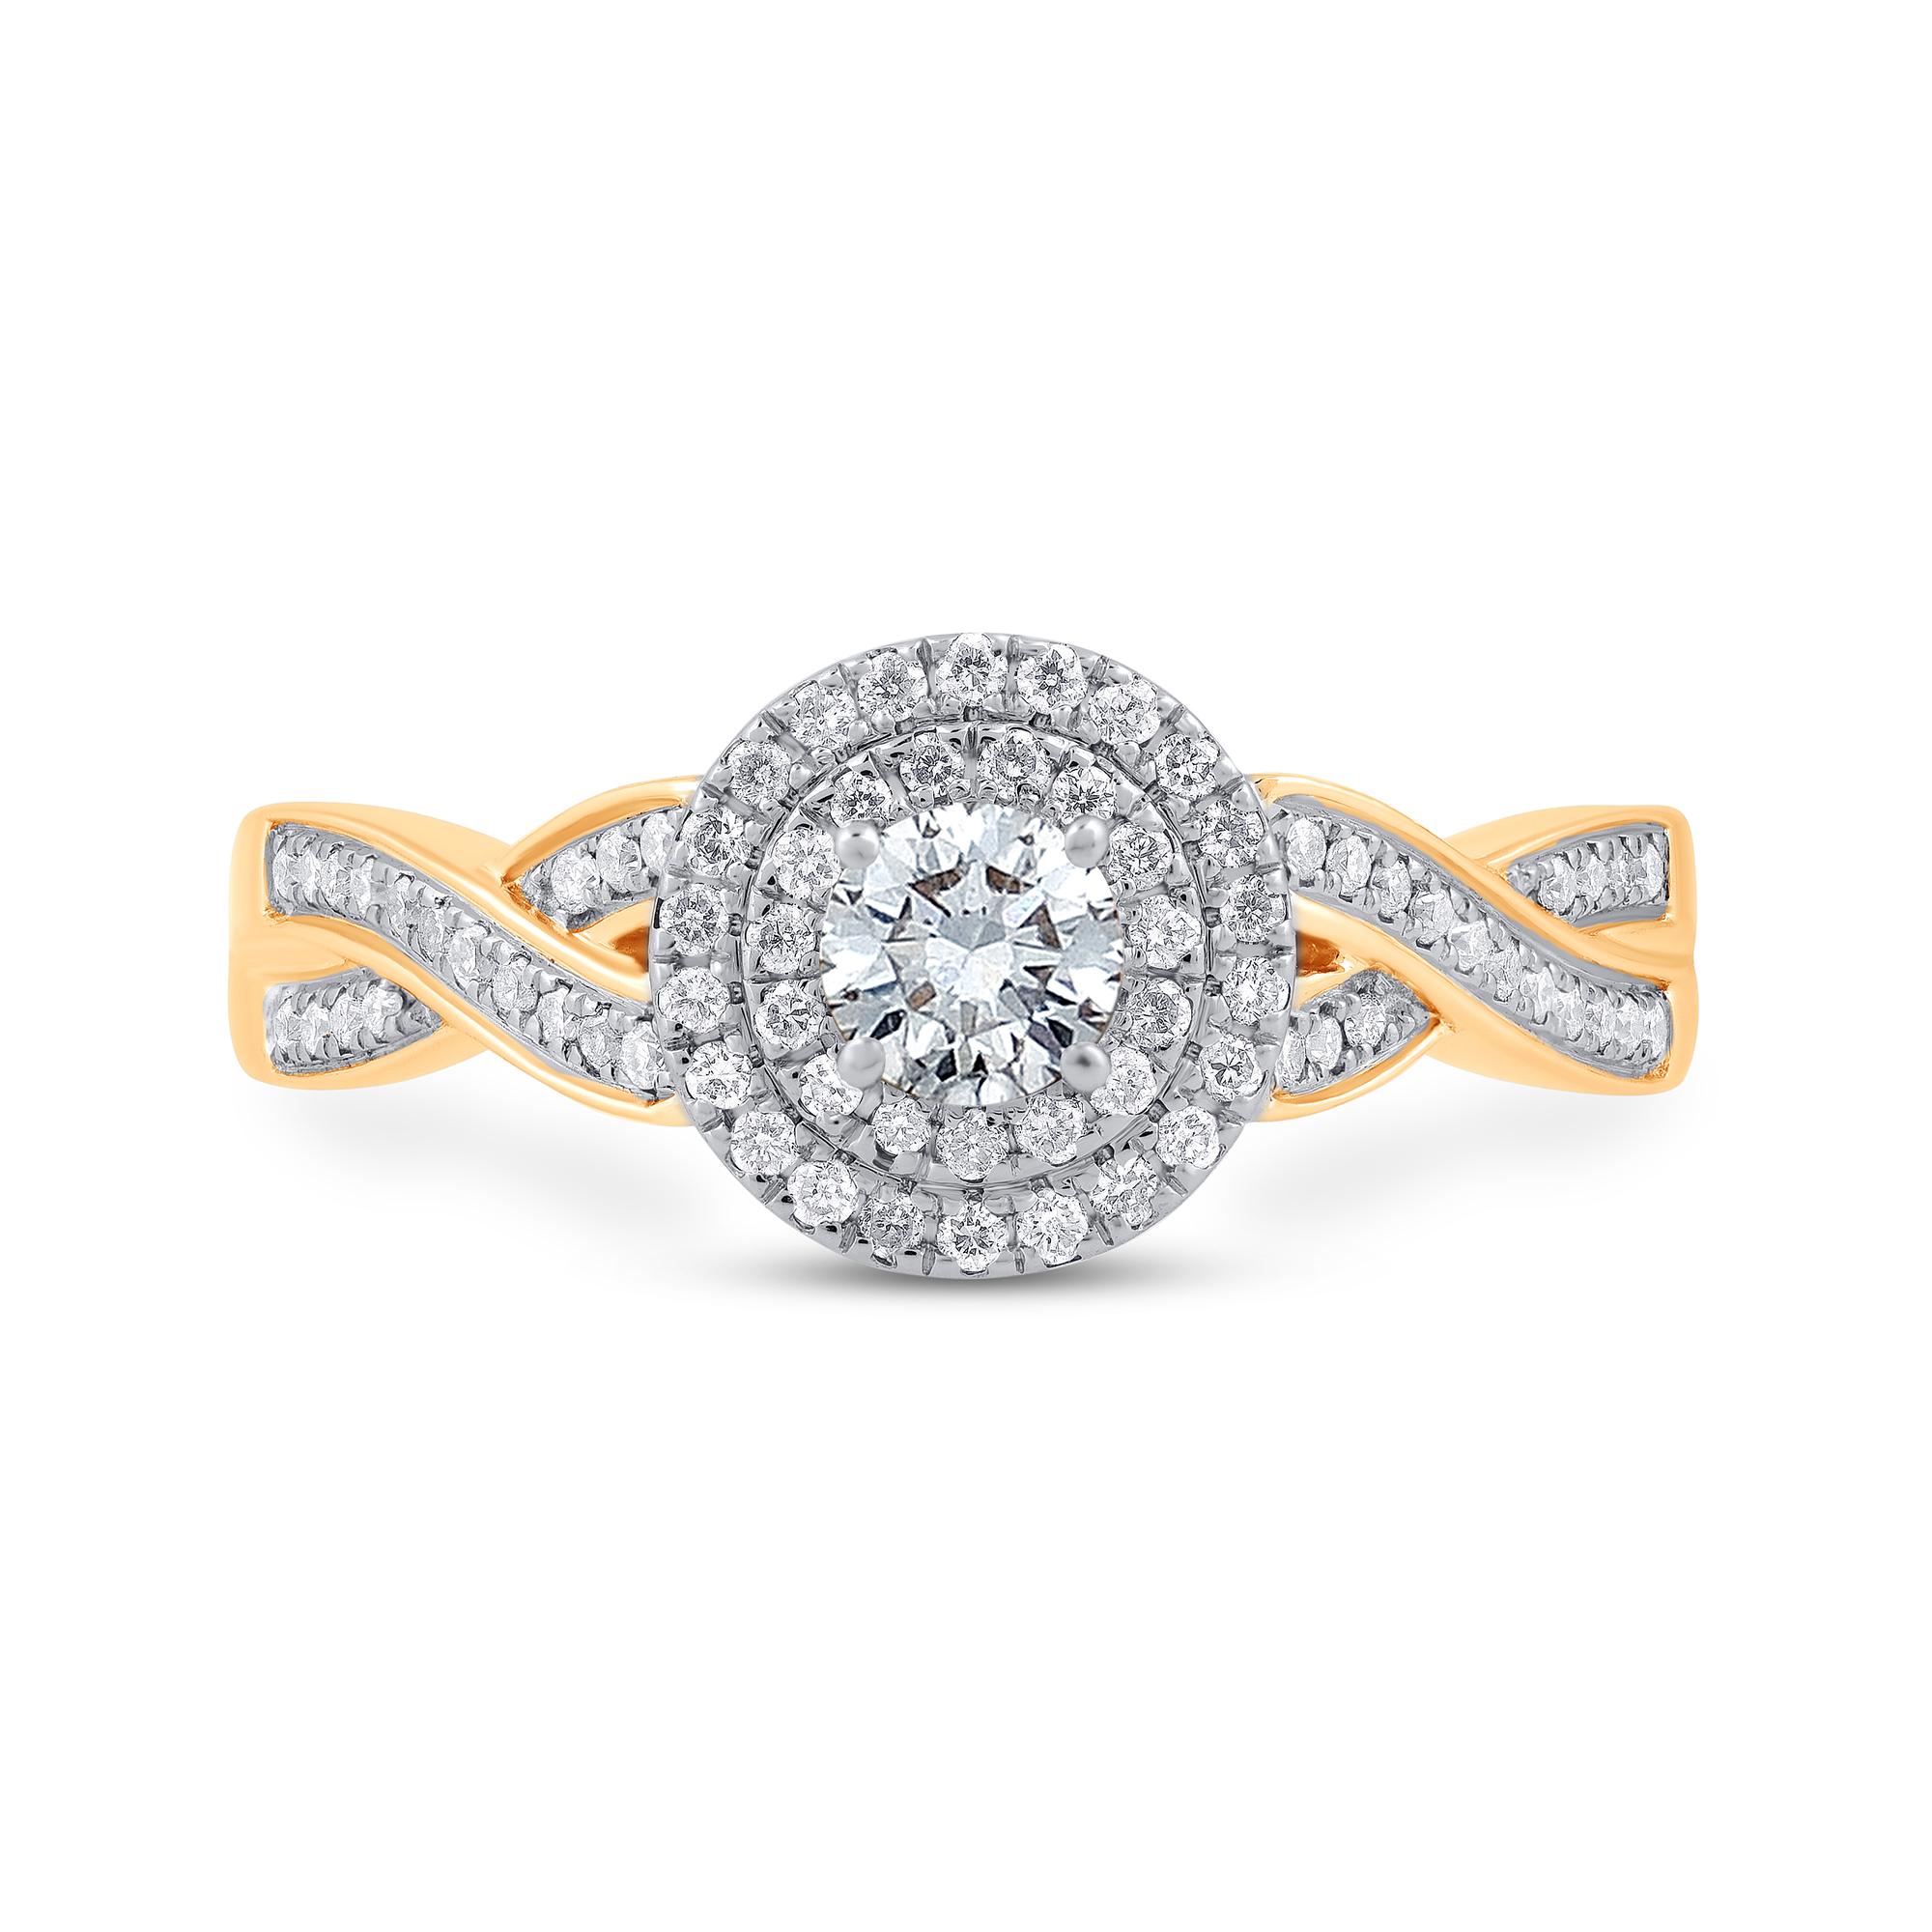 Stunning and classic, this diamond ring is beautifully crafted in 14 karat Solid yellow gold. The engagement ring features 0.50 ct of diamond frame and twisted shank lined sparkling white diamonds set in secured bezel, prong and pave settings. The